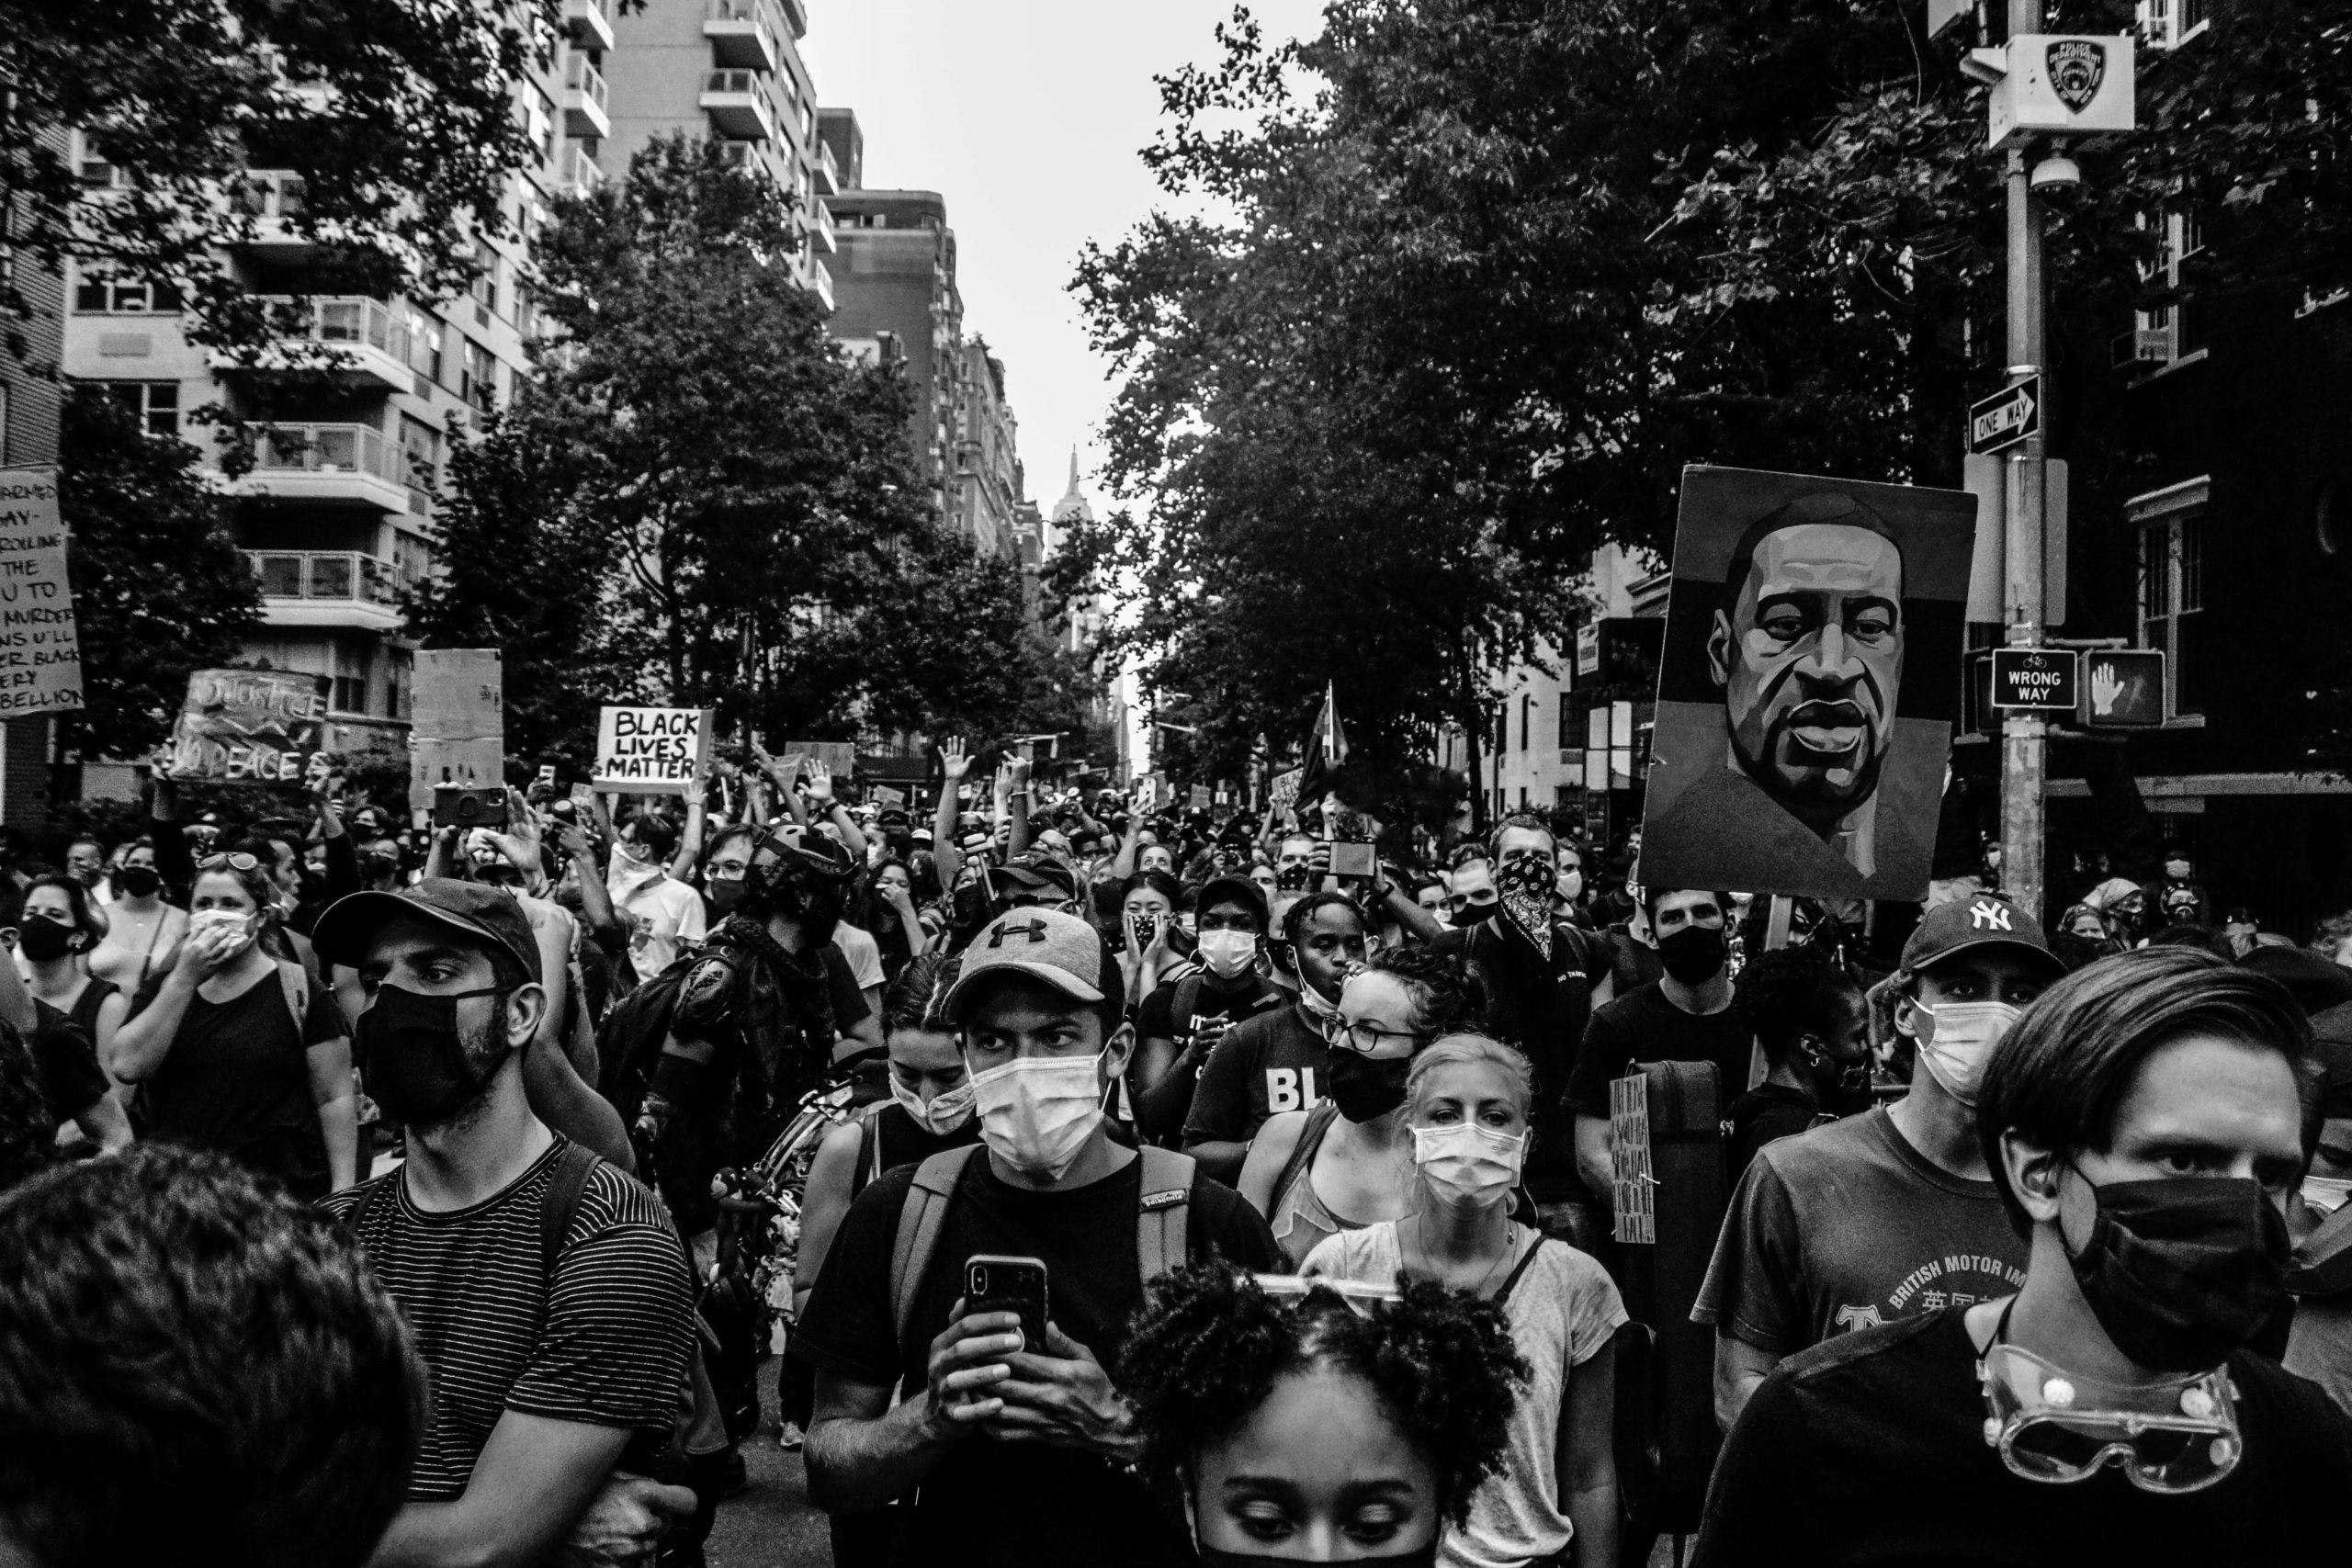 Data — Politics 2020: Protest, Racism, & Policing (July 2020)